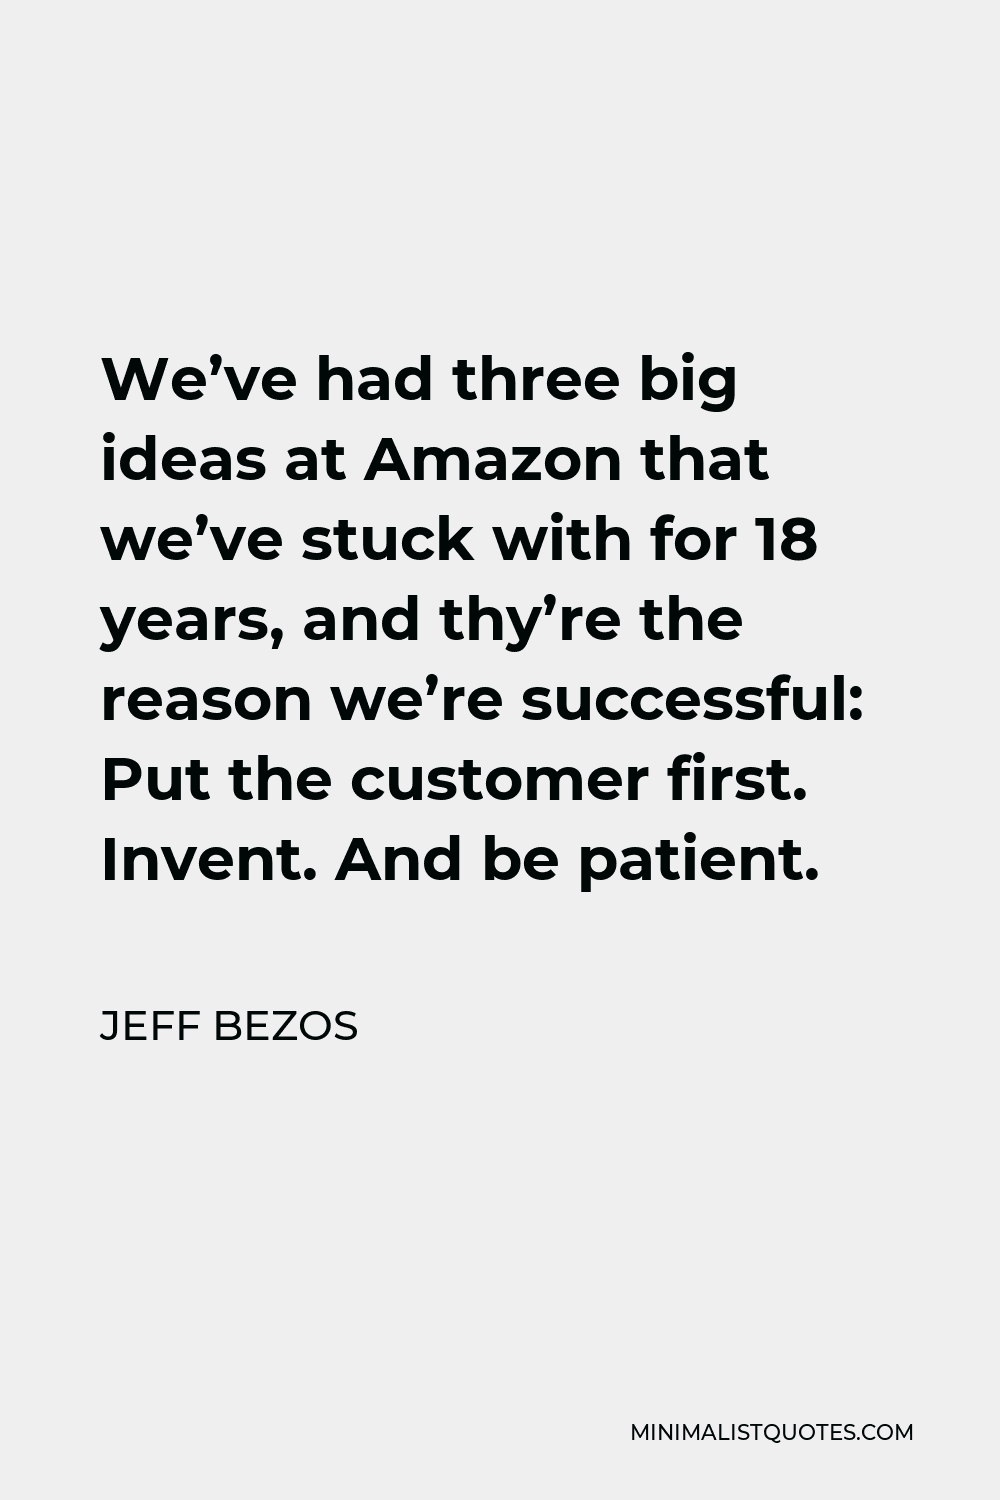 Jeff Bezos Quote - We’ve had three big ideas at Amazon that we’ve stuck with for 18 years, and thy’re the reason we’re successful: Put the customer first. Invent. And be patient.